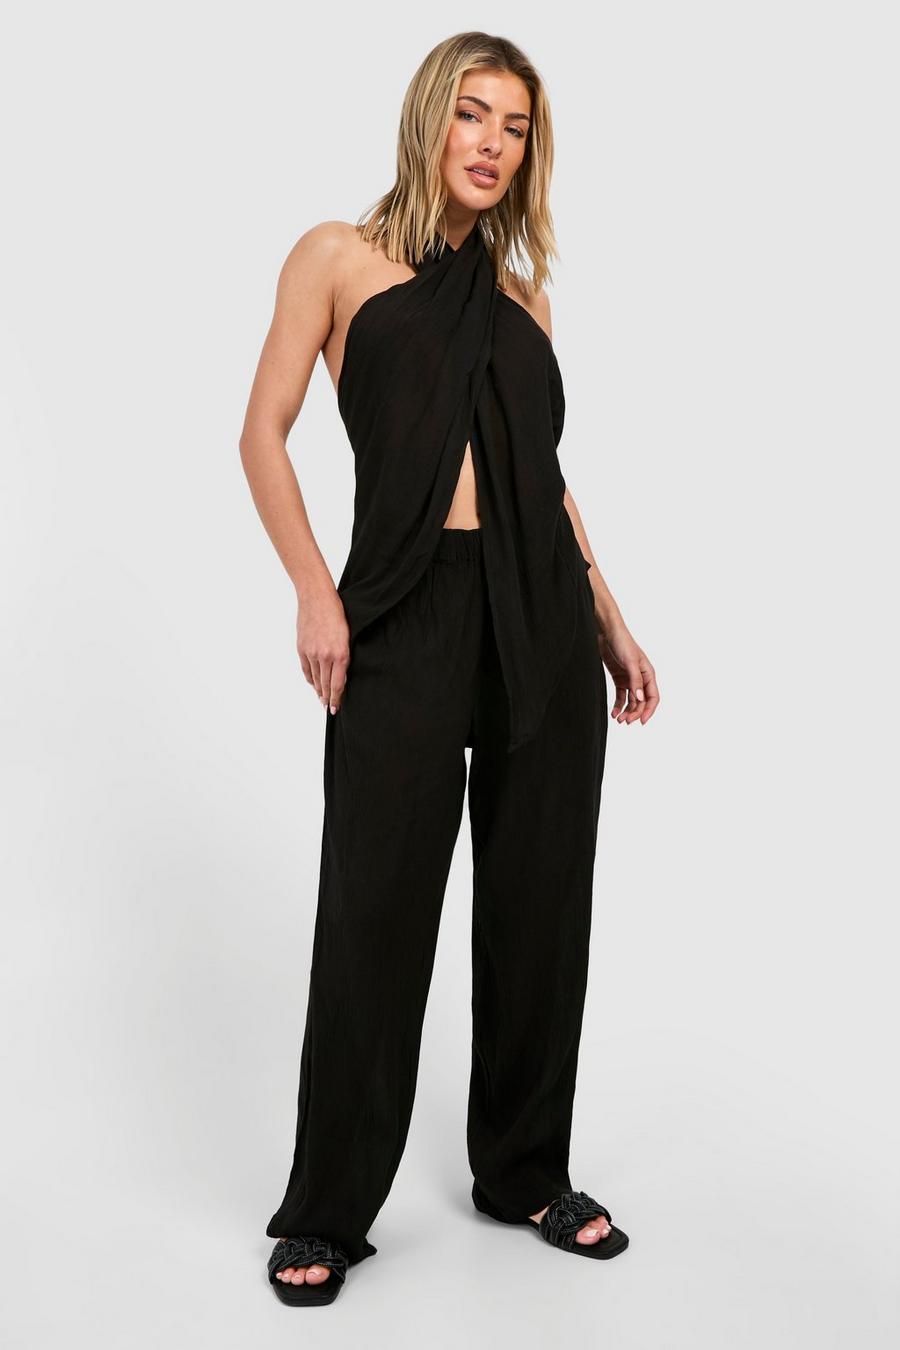 Black Cheesecloth Cross Over Top & Trouser Beach Co-ord